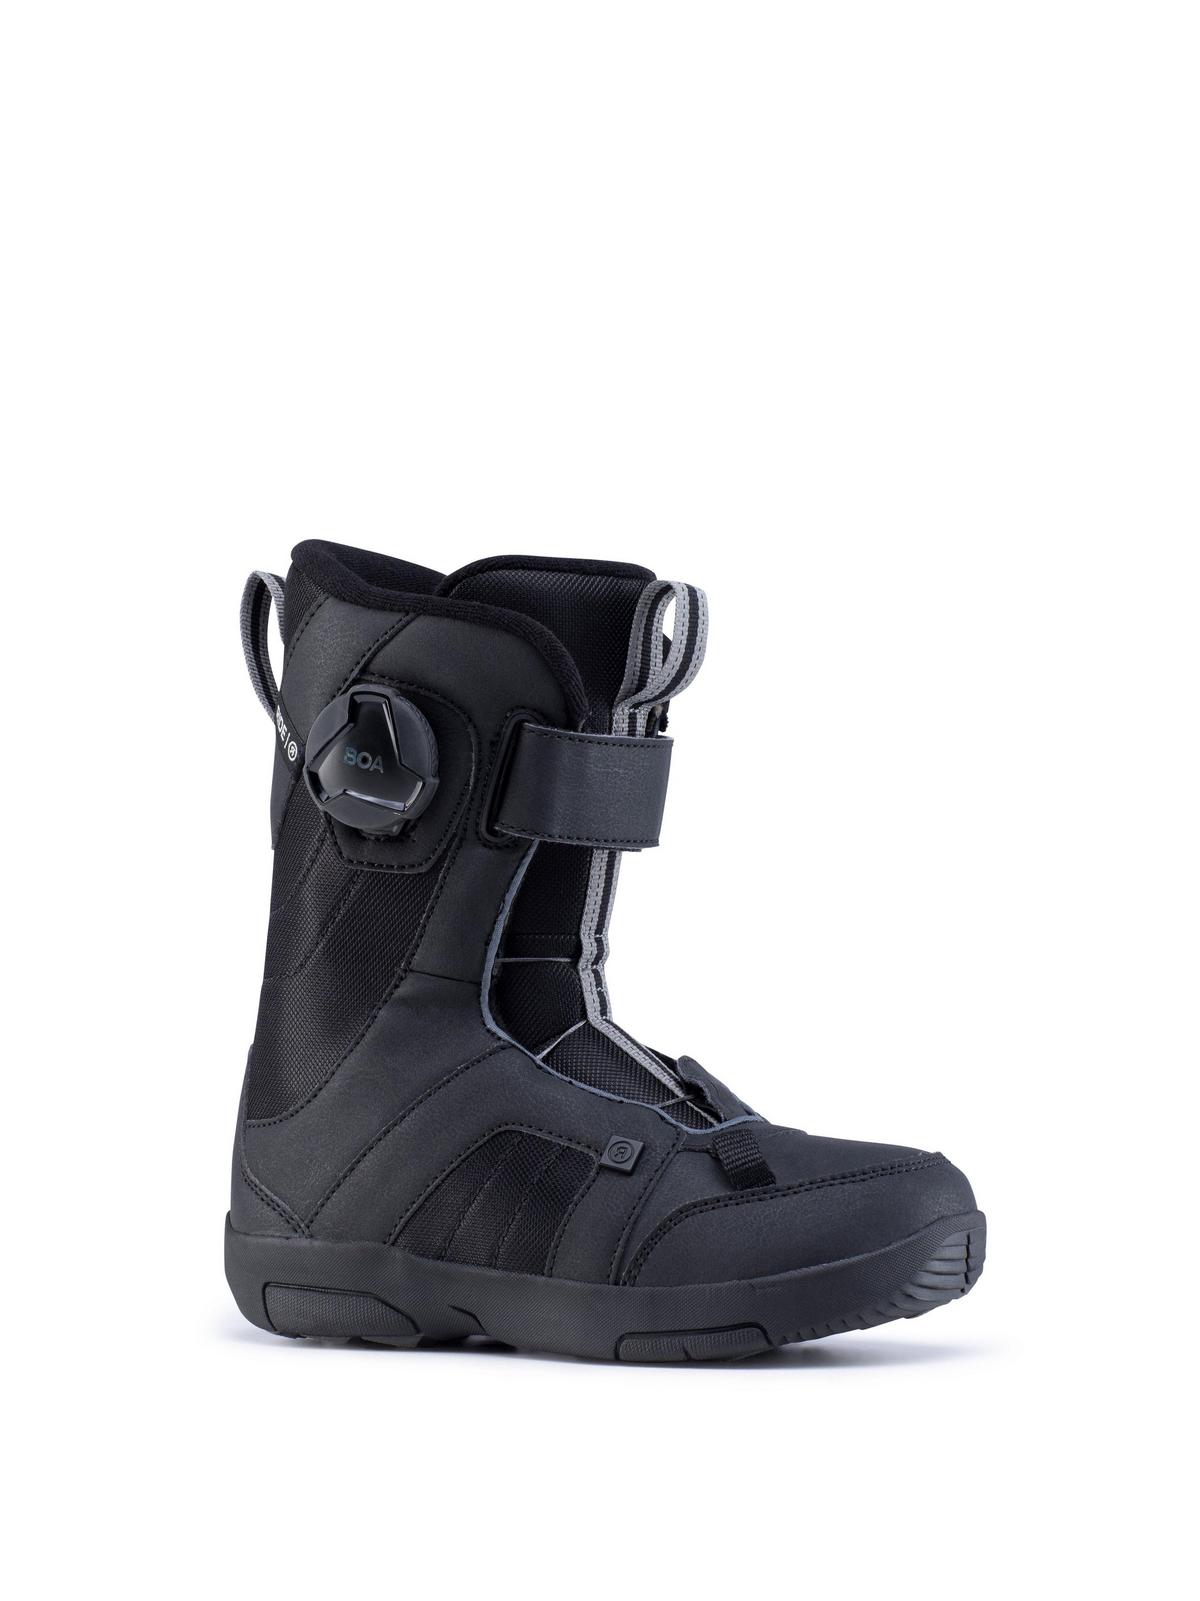 Norris Snowboard Boots | RIDE Snowboards